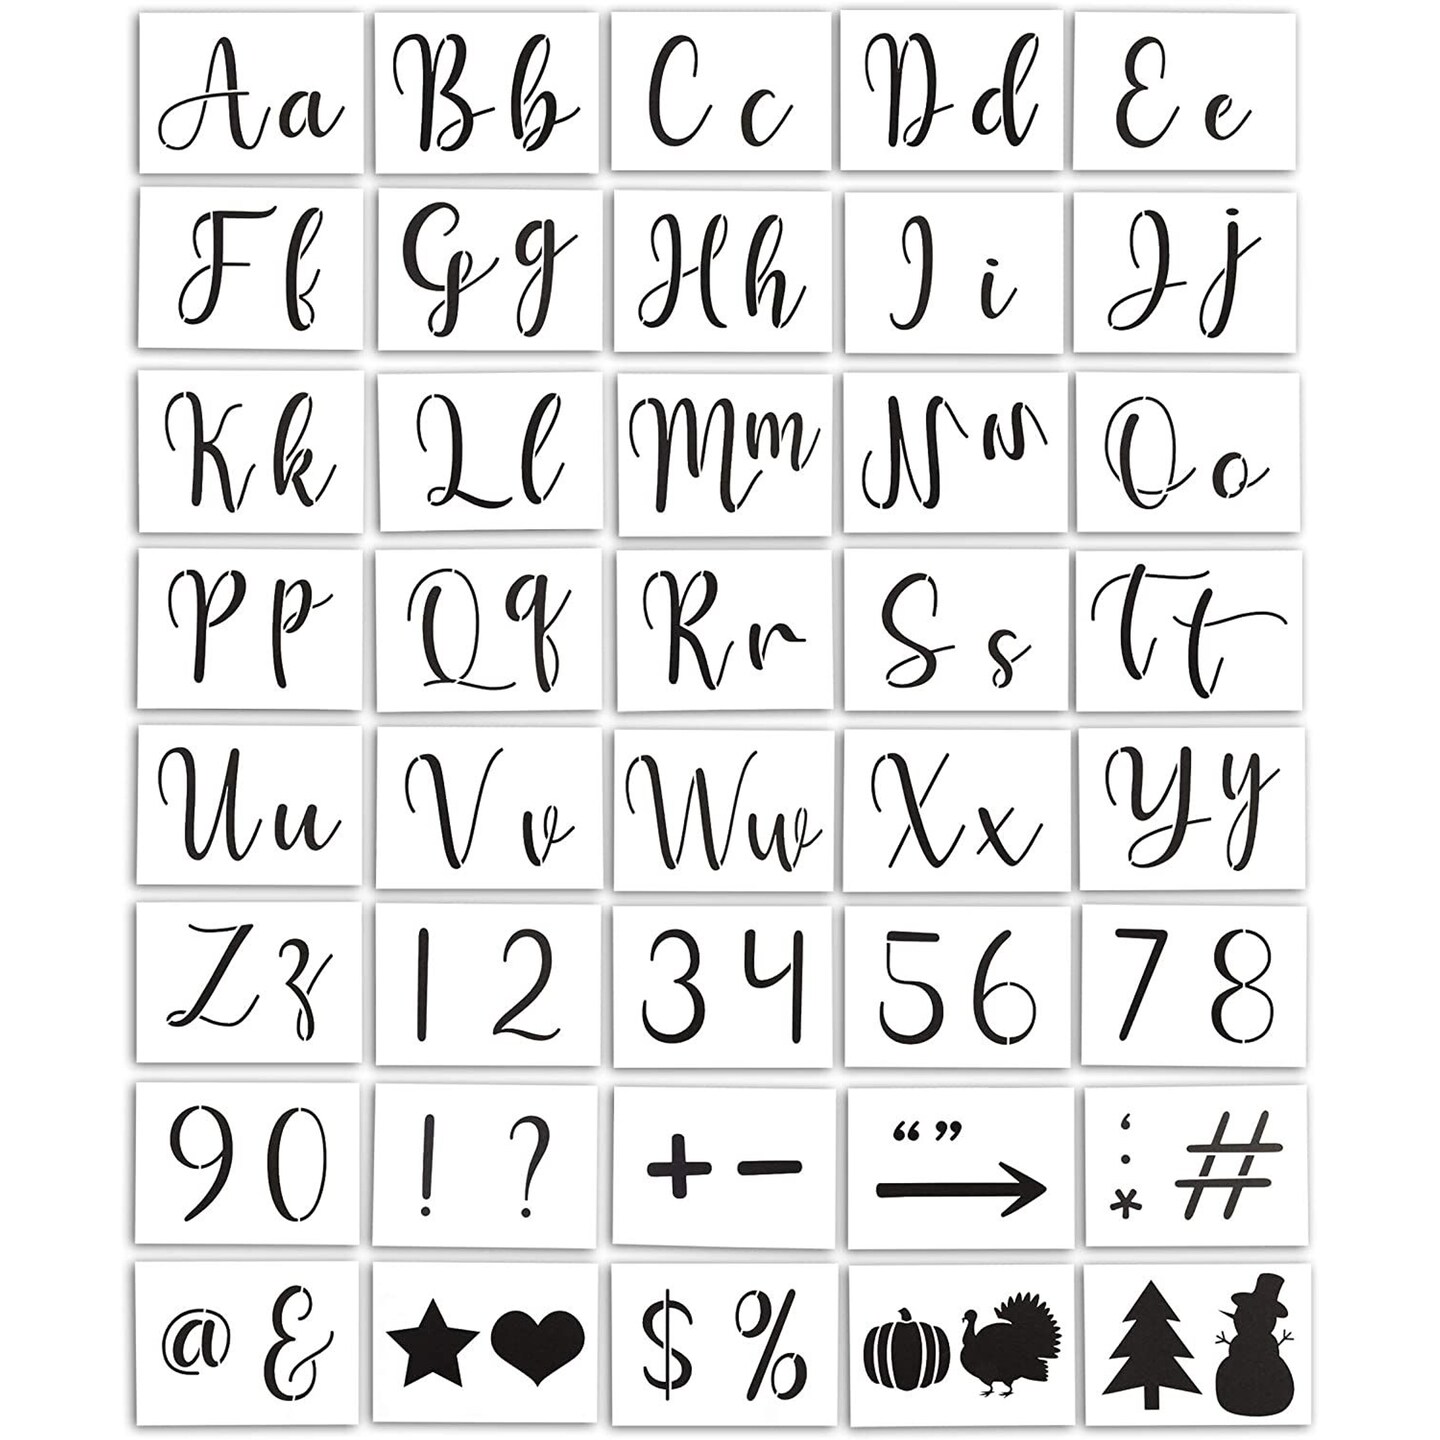 Alphabet Letter and Number Stencils 5 inch - 40 Pack Large Letters and Numbers Stencil Templates with Signs for Painting on Wood, Reusable Number